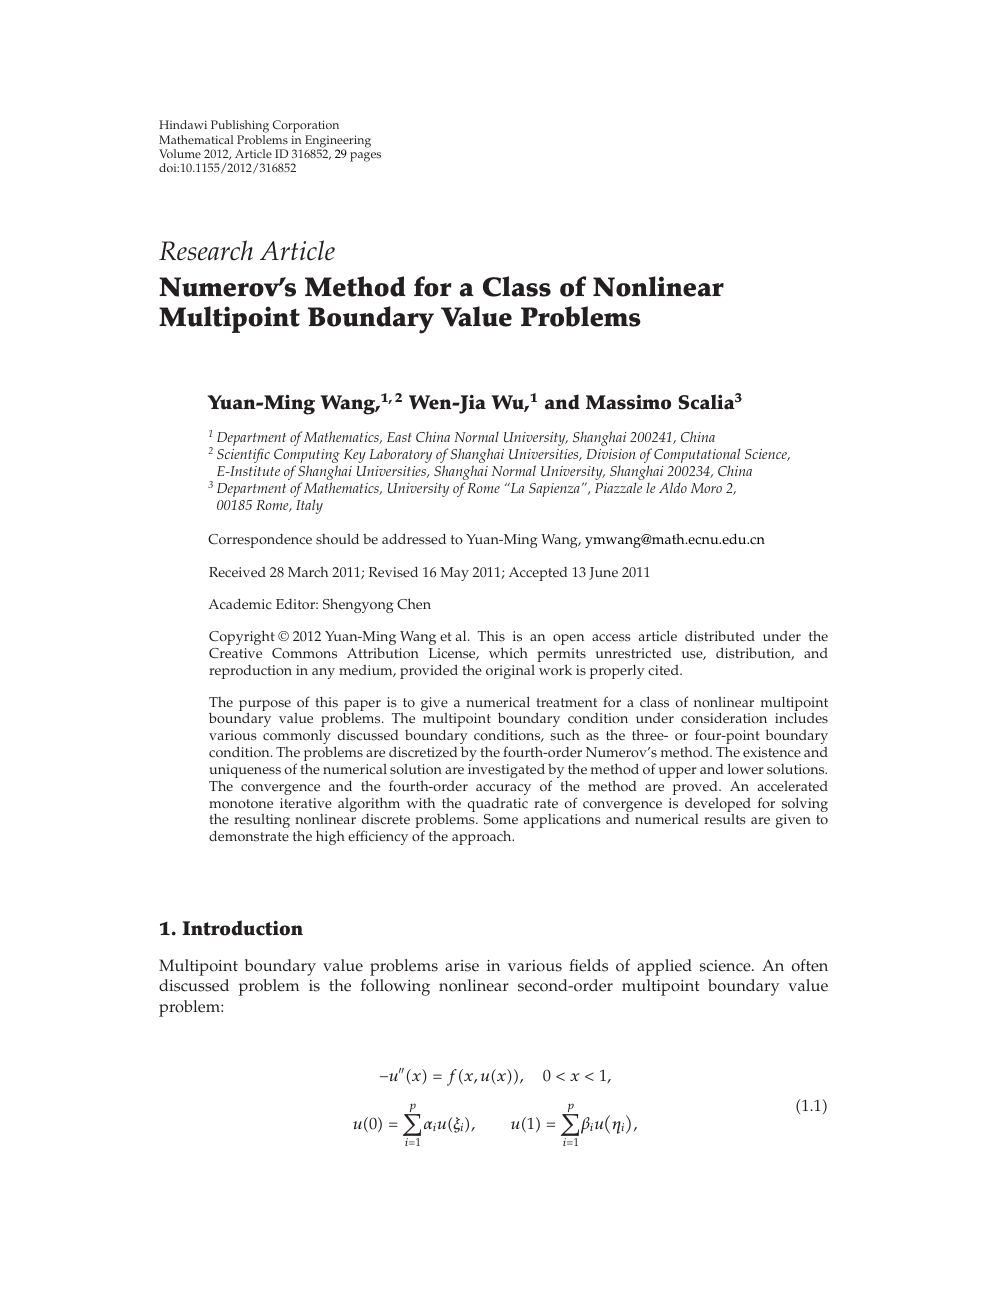 Numerov S Method For A Class Of Nonlinear Multipoint Boundary Value Problems Topic Of Research Paper In Mathematics Download Scholarly Article Pdf And Read For Free On Cyberleninka Open Science Hub